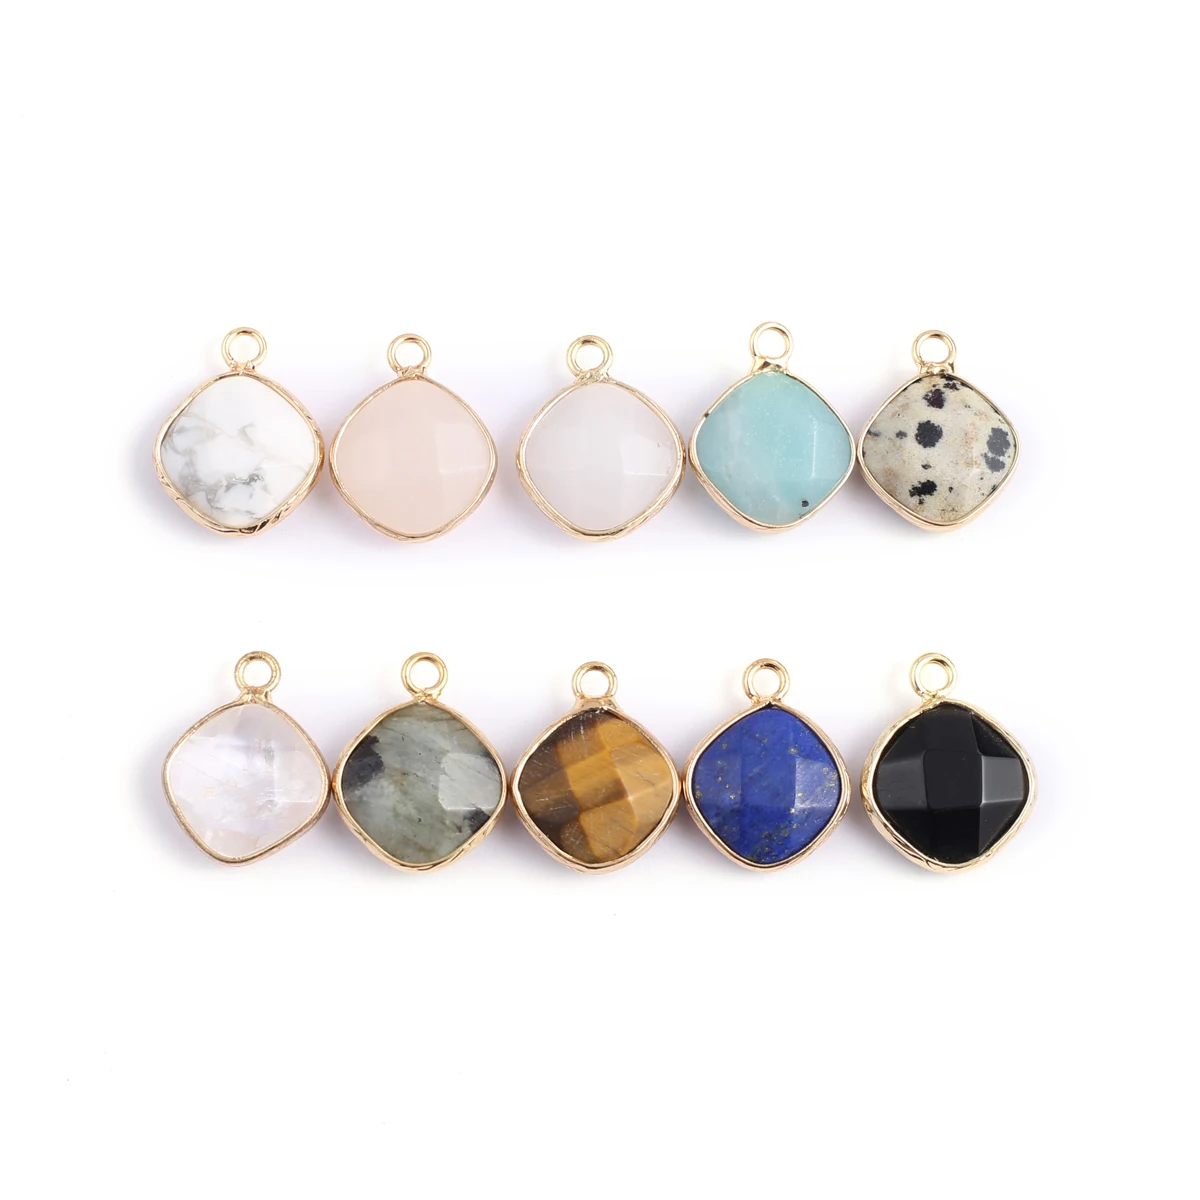 

Charms Natural Agates Pendant Plating Golden Color Small Stone Pendant for Making DIY Jewelry Necklace Accessory 15x20mm